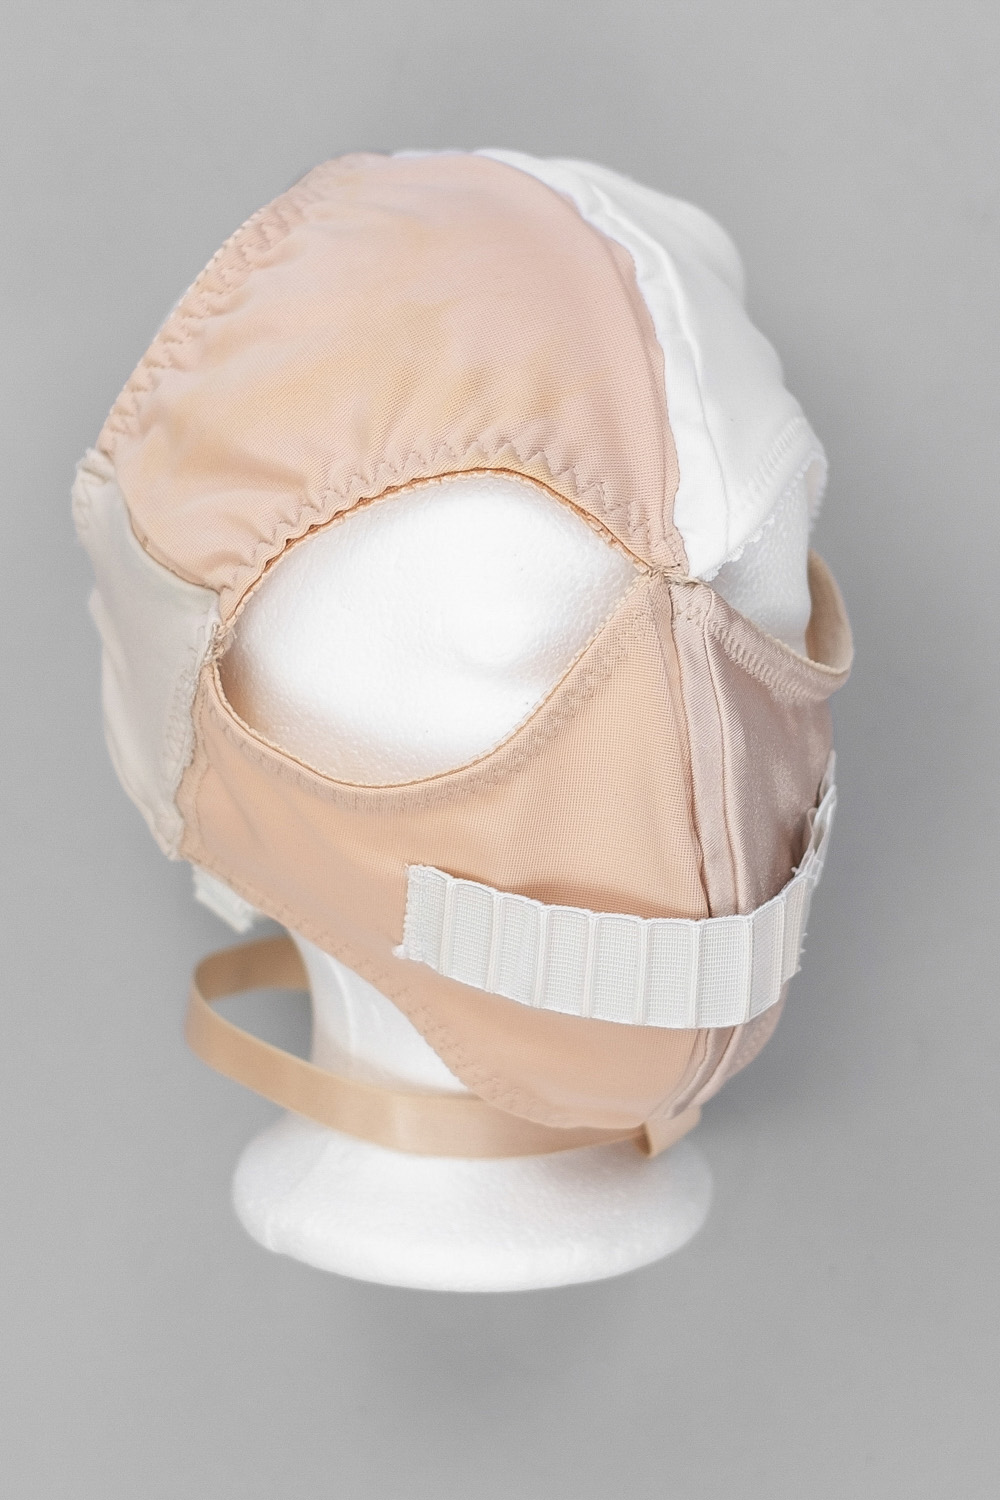 Gusset Mask in Beige and White 113